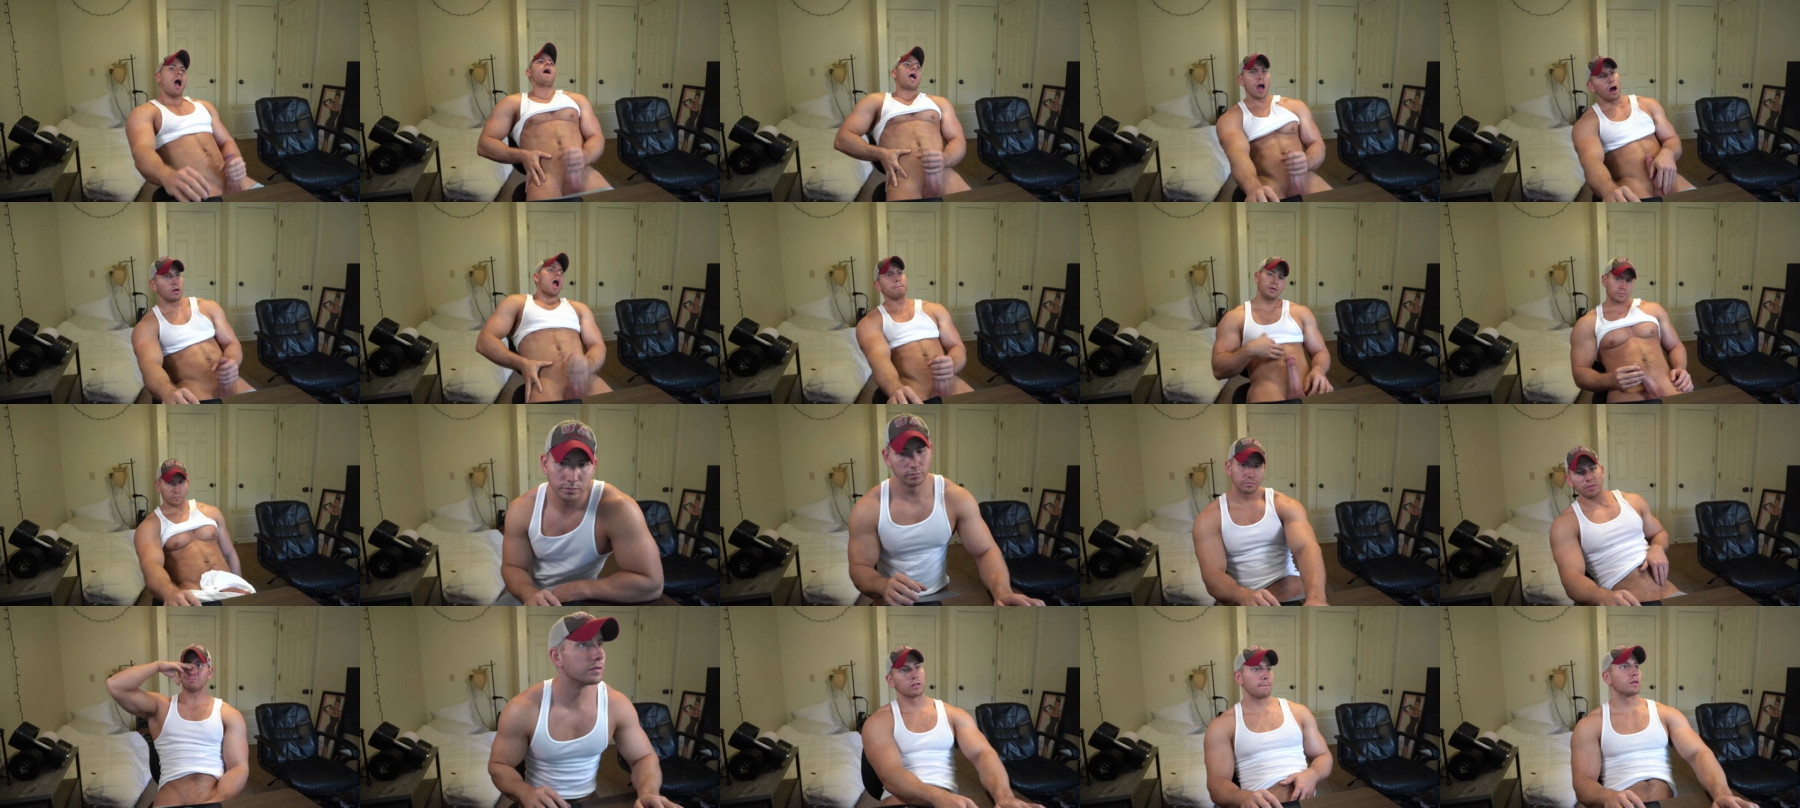 Hotmuscles6t9 Topless CAM SHOW @ Chaturbate 10-05-2021